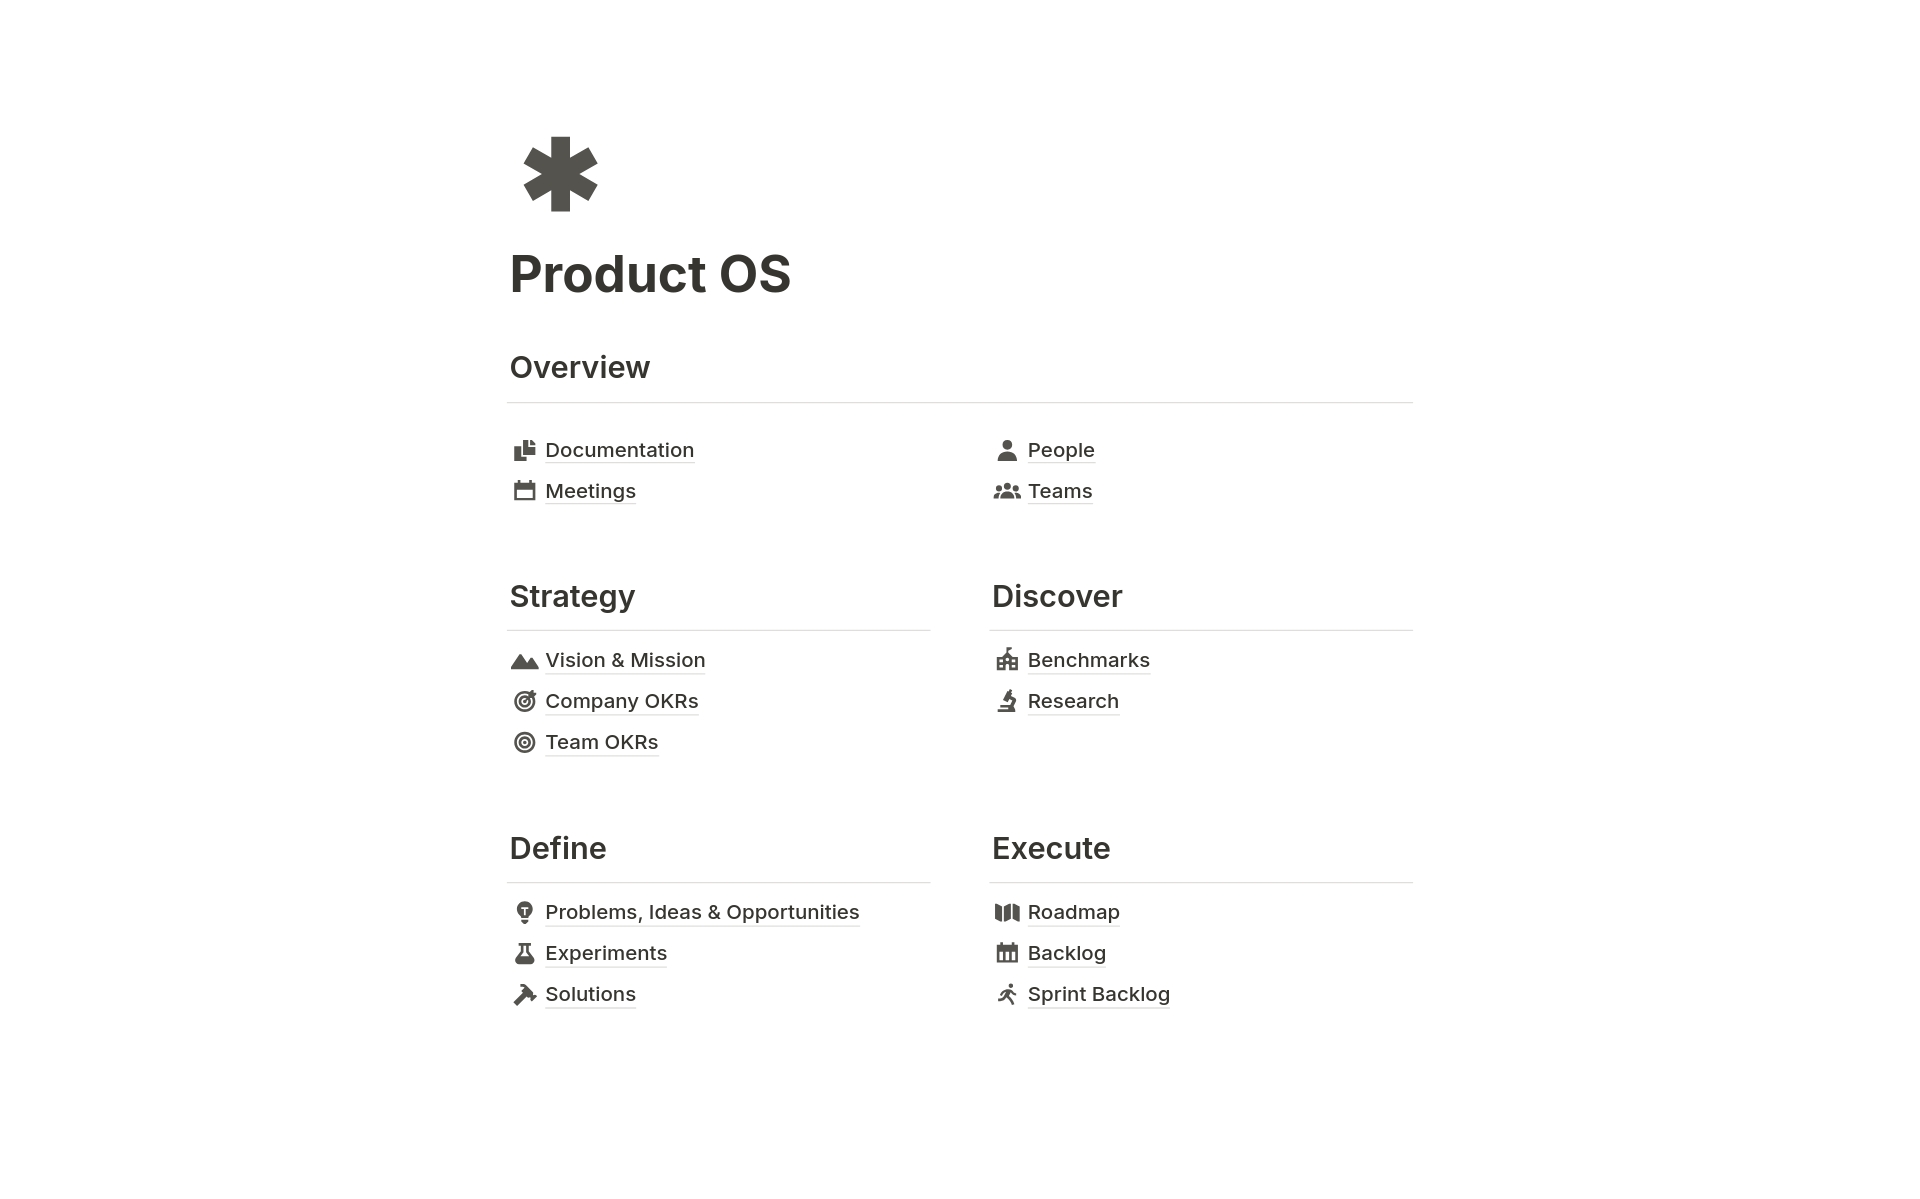 Say goodbye 👋 to confusion and welcome 🤗 to clarity with Product OS. Empower 💪 your startup, company or product team to thrive like never before!